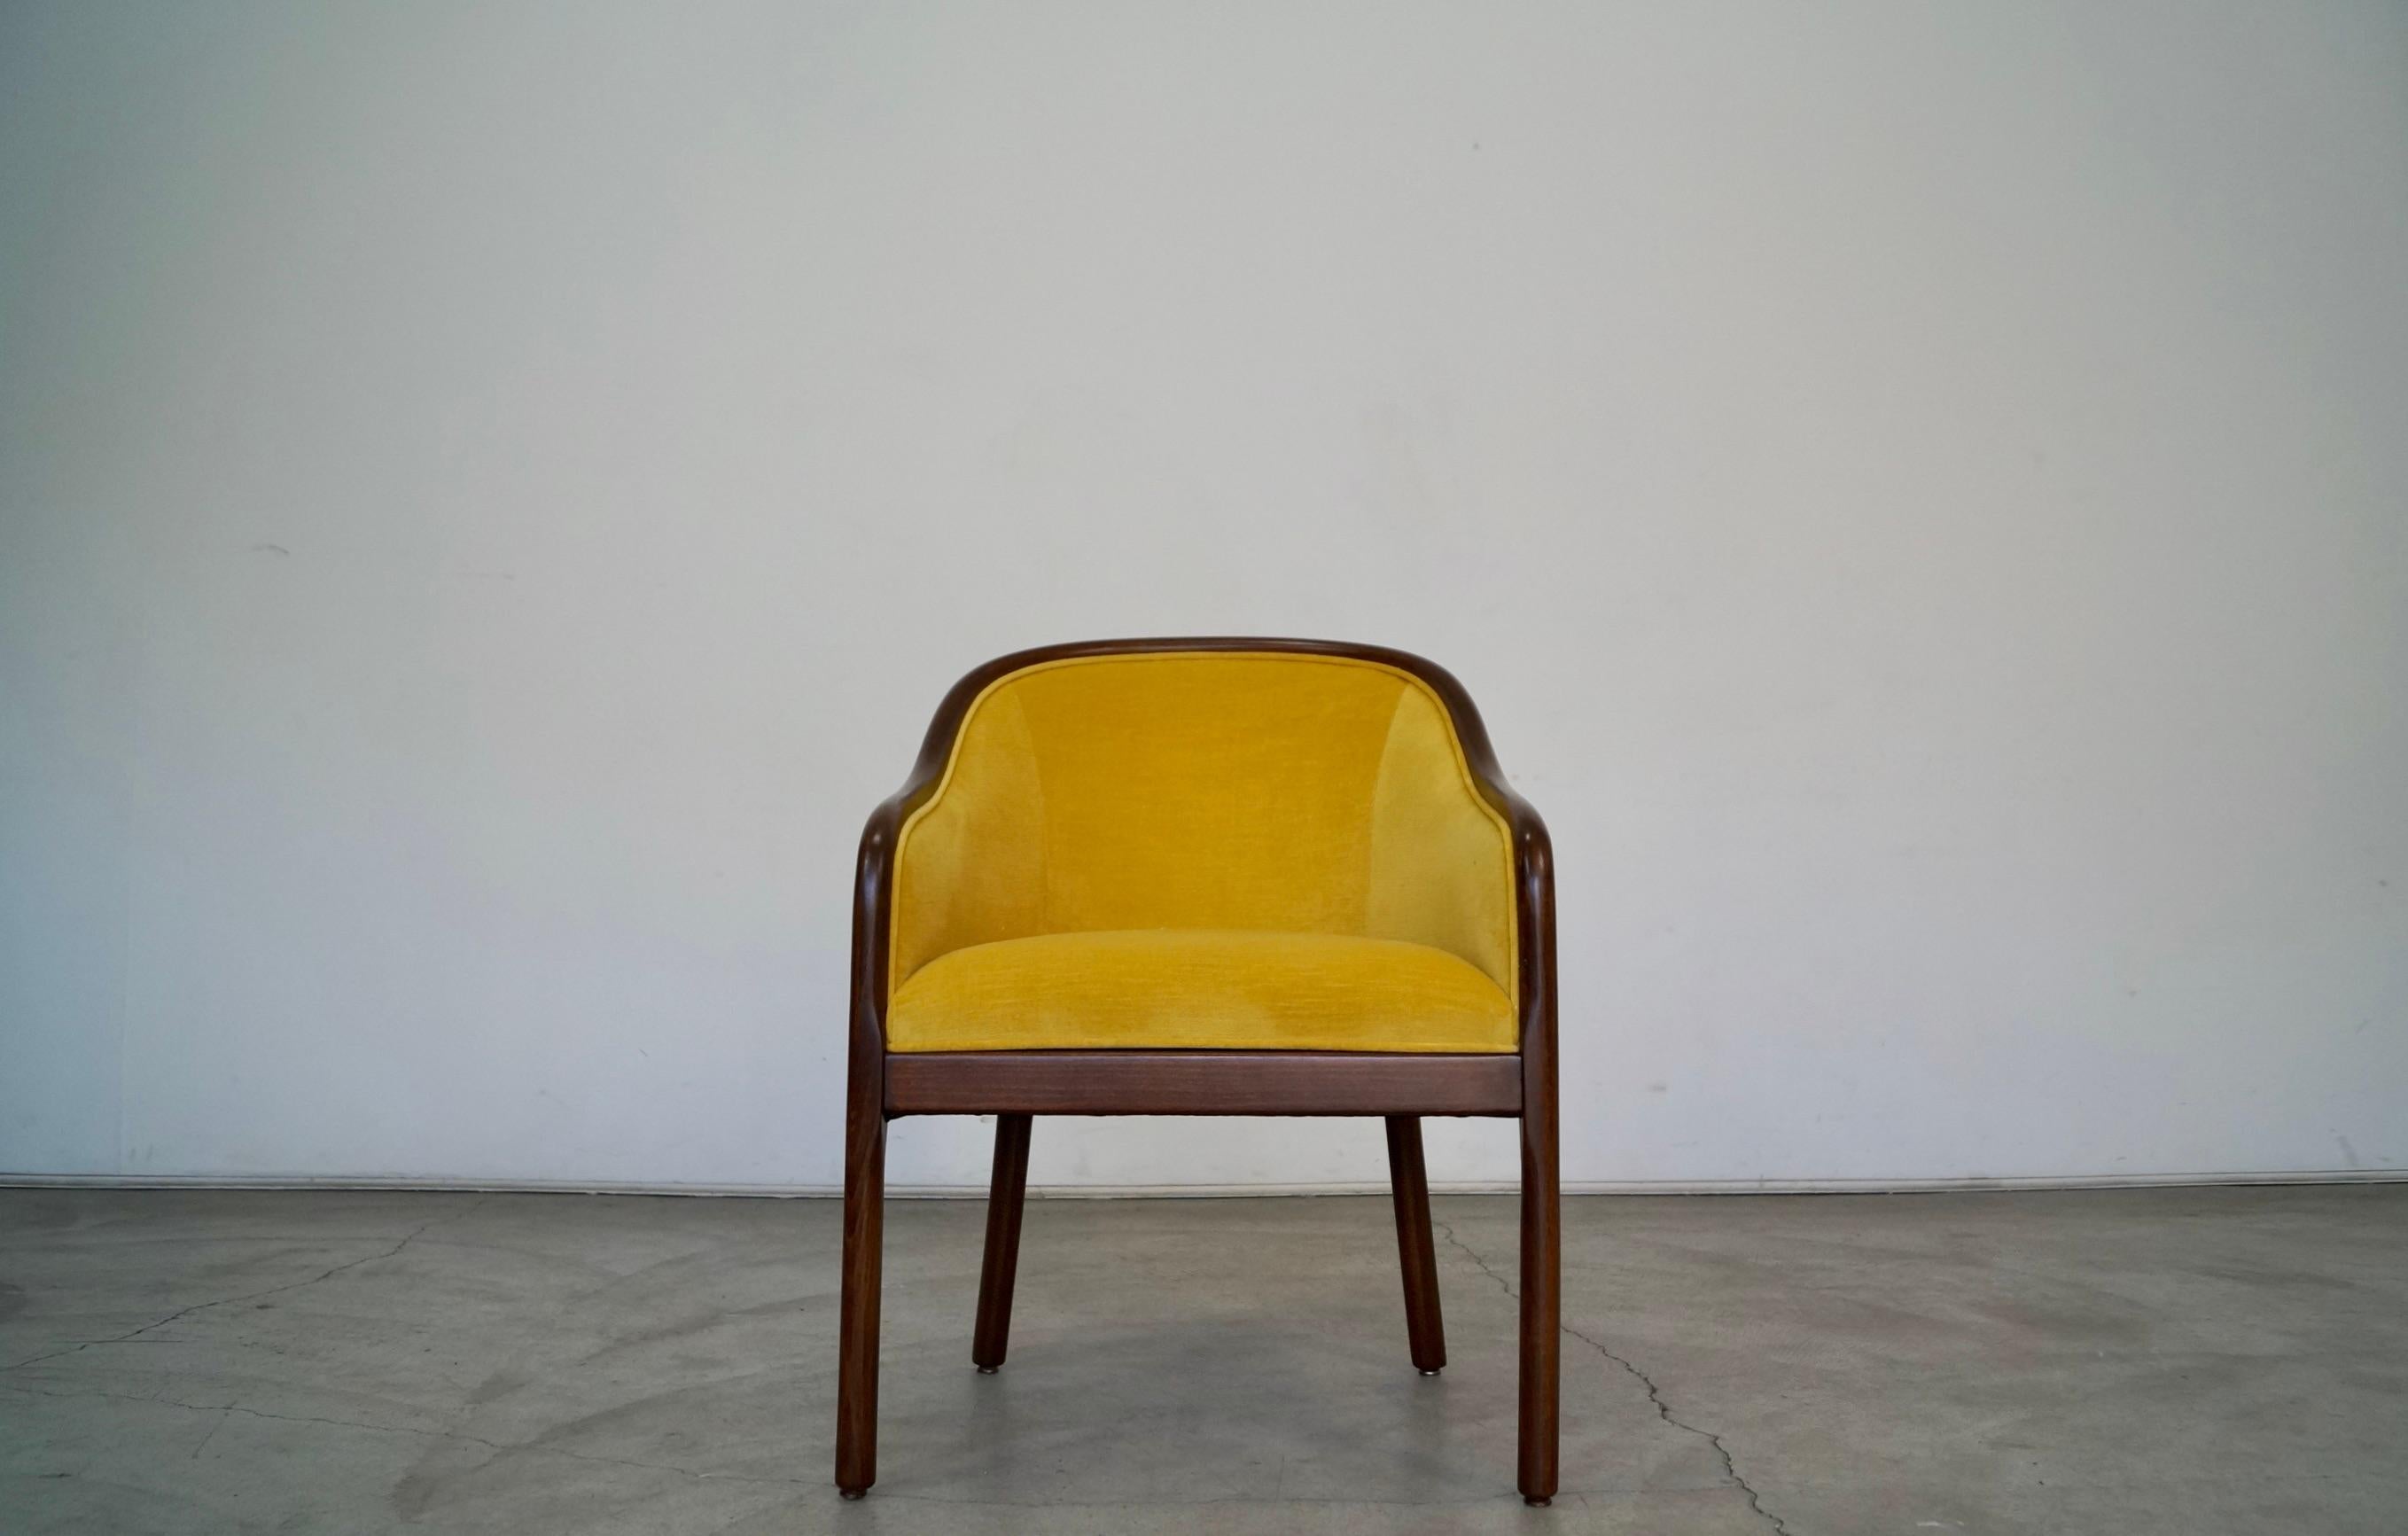 Vintage 1970s armchair for sale. Designed by Ward Bennett in the 1970s, and has been professionally refinished and reupholstered in new fabric and foam. The frame is solid beechwood, and has been refinished in walnut. It has been reupholstered in a